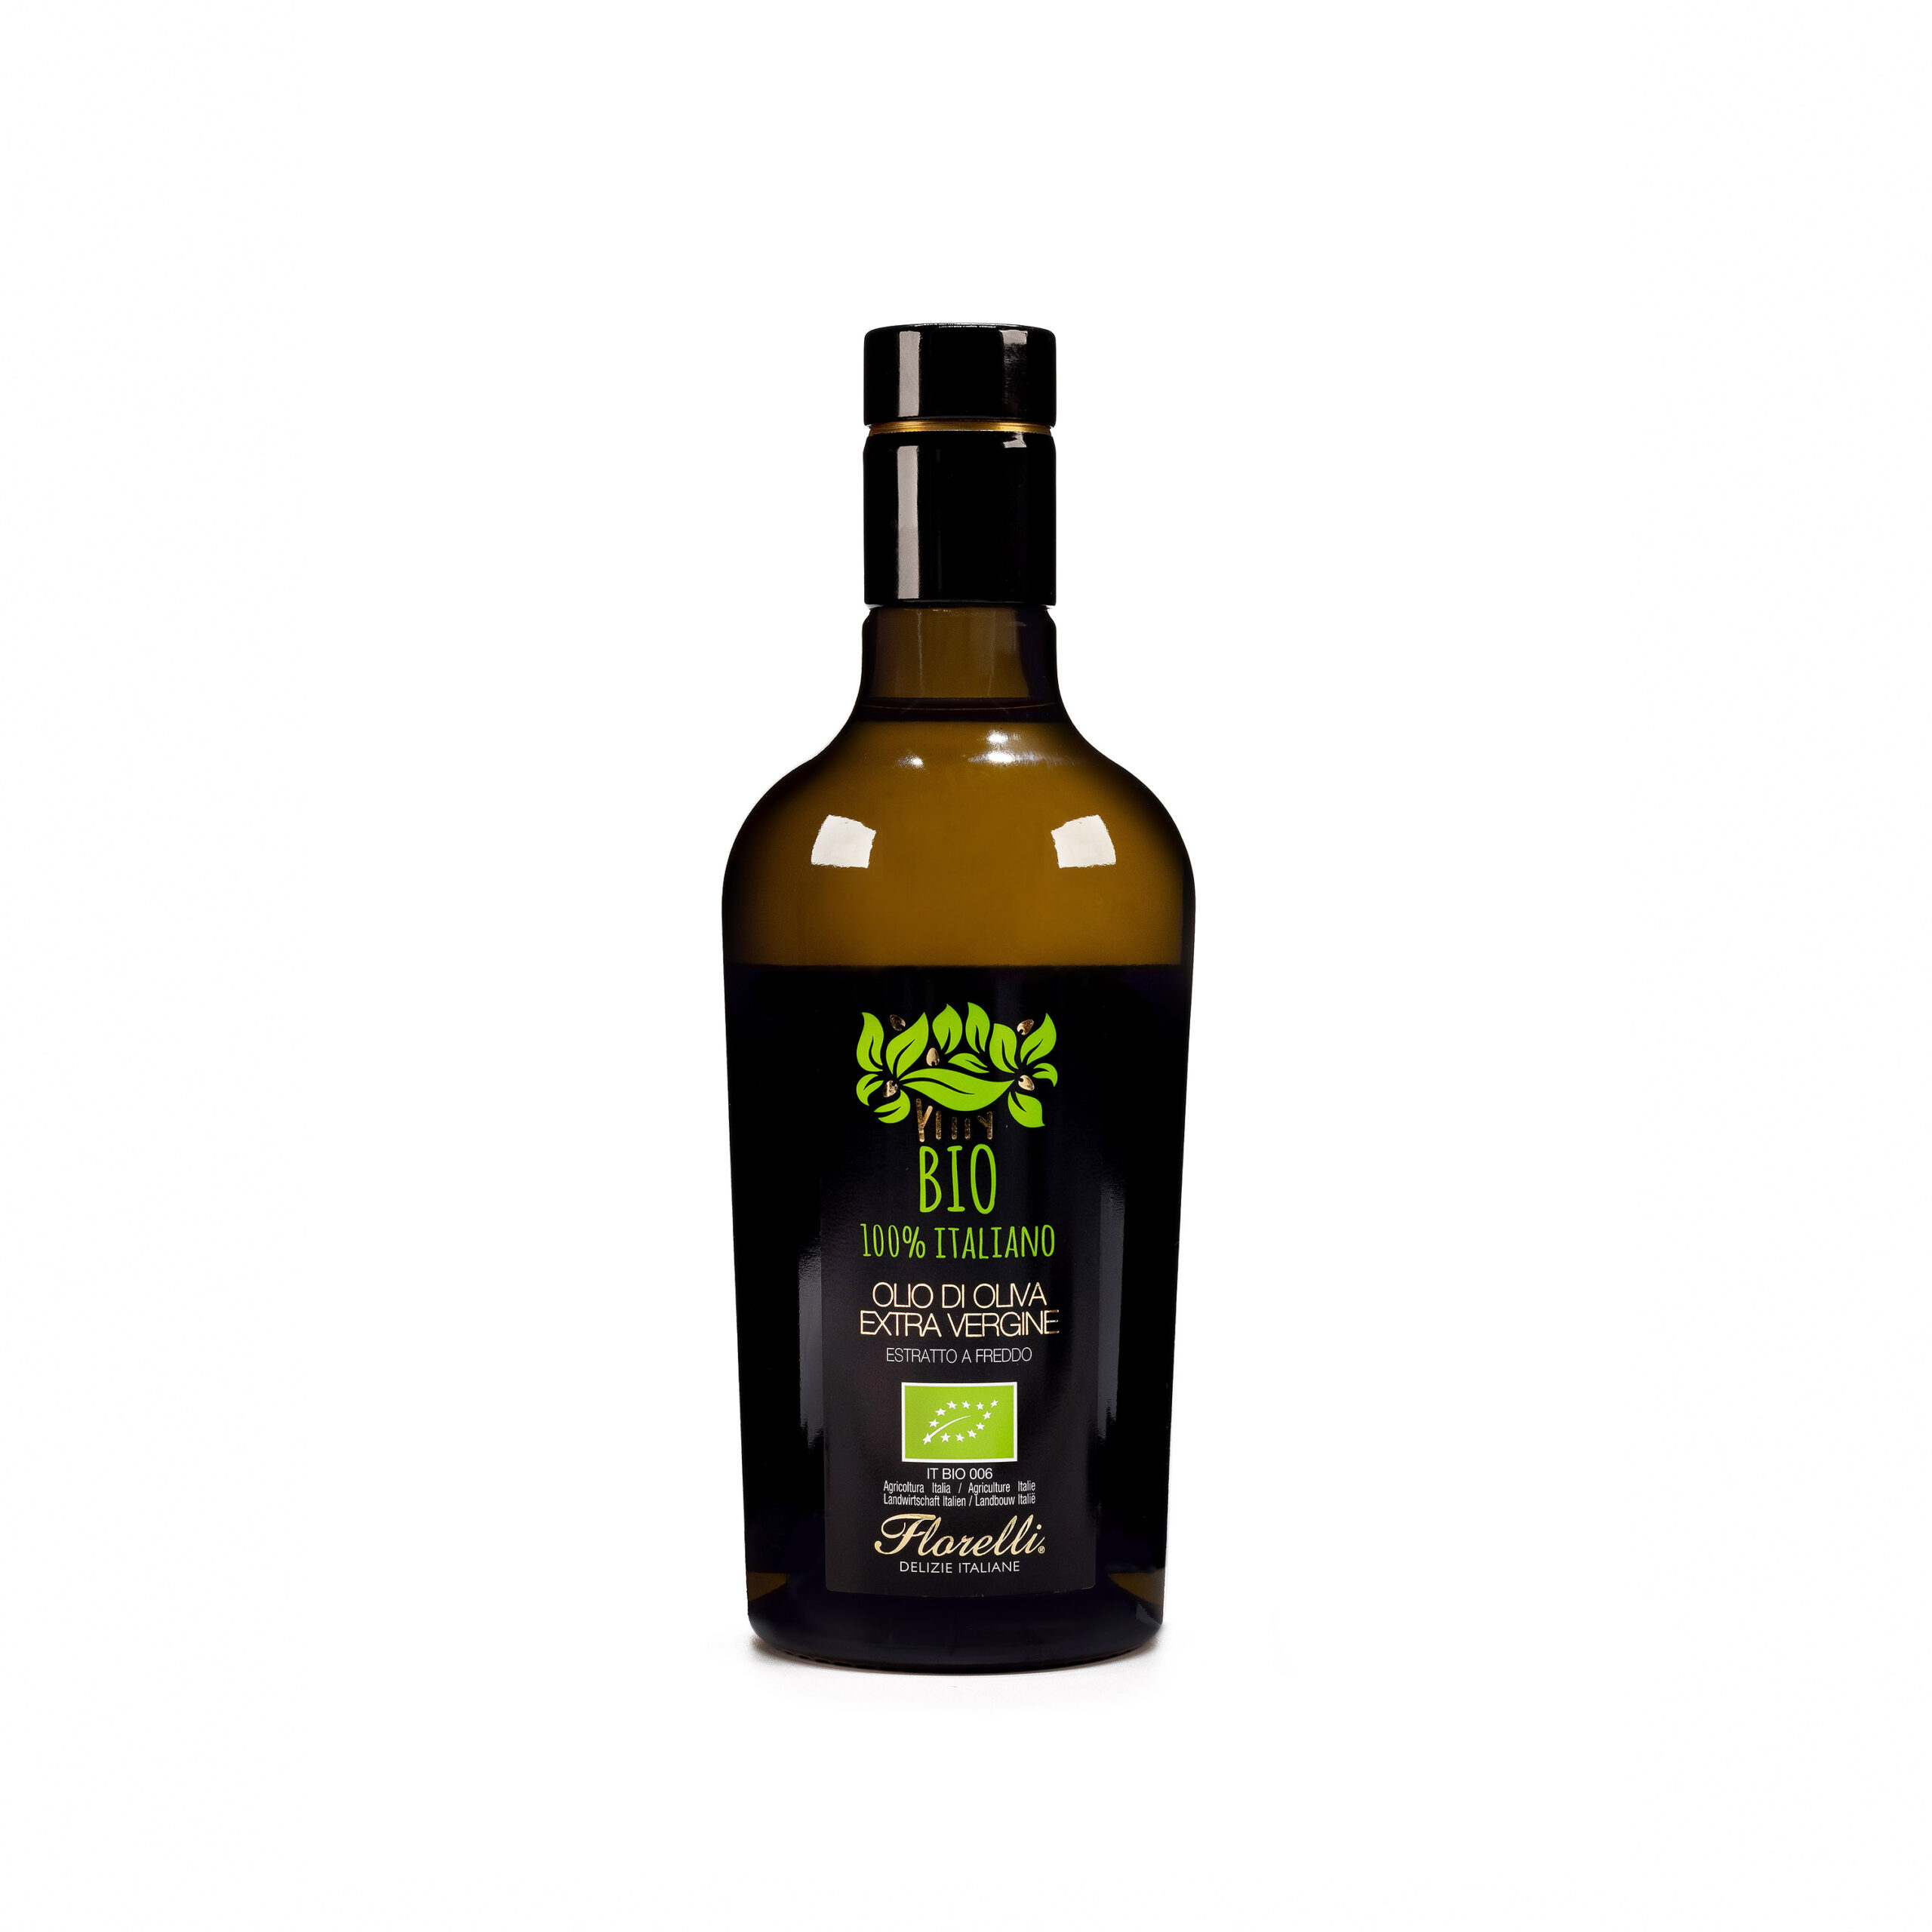 Huile d’olive extra vierge 100% italienne bio